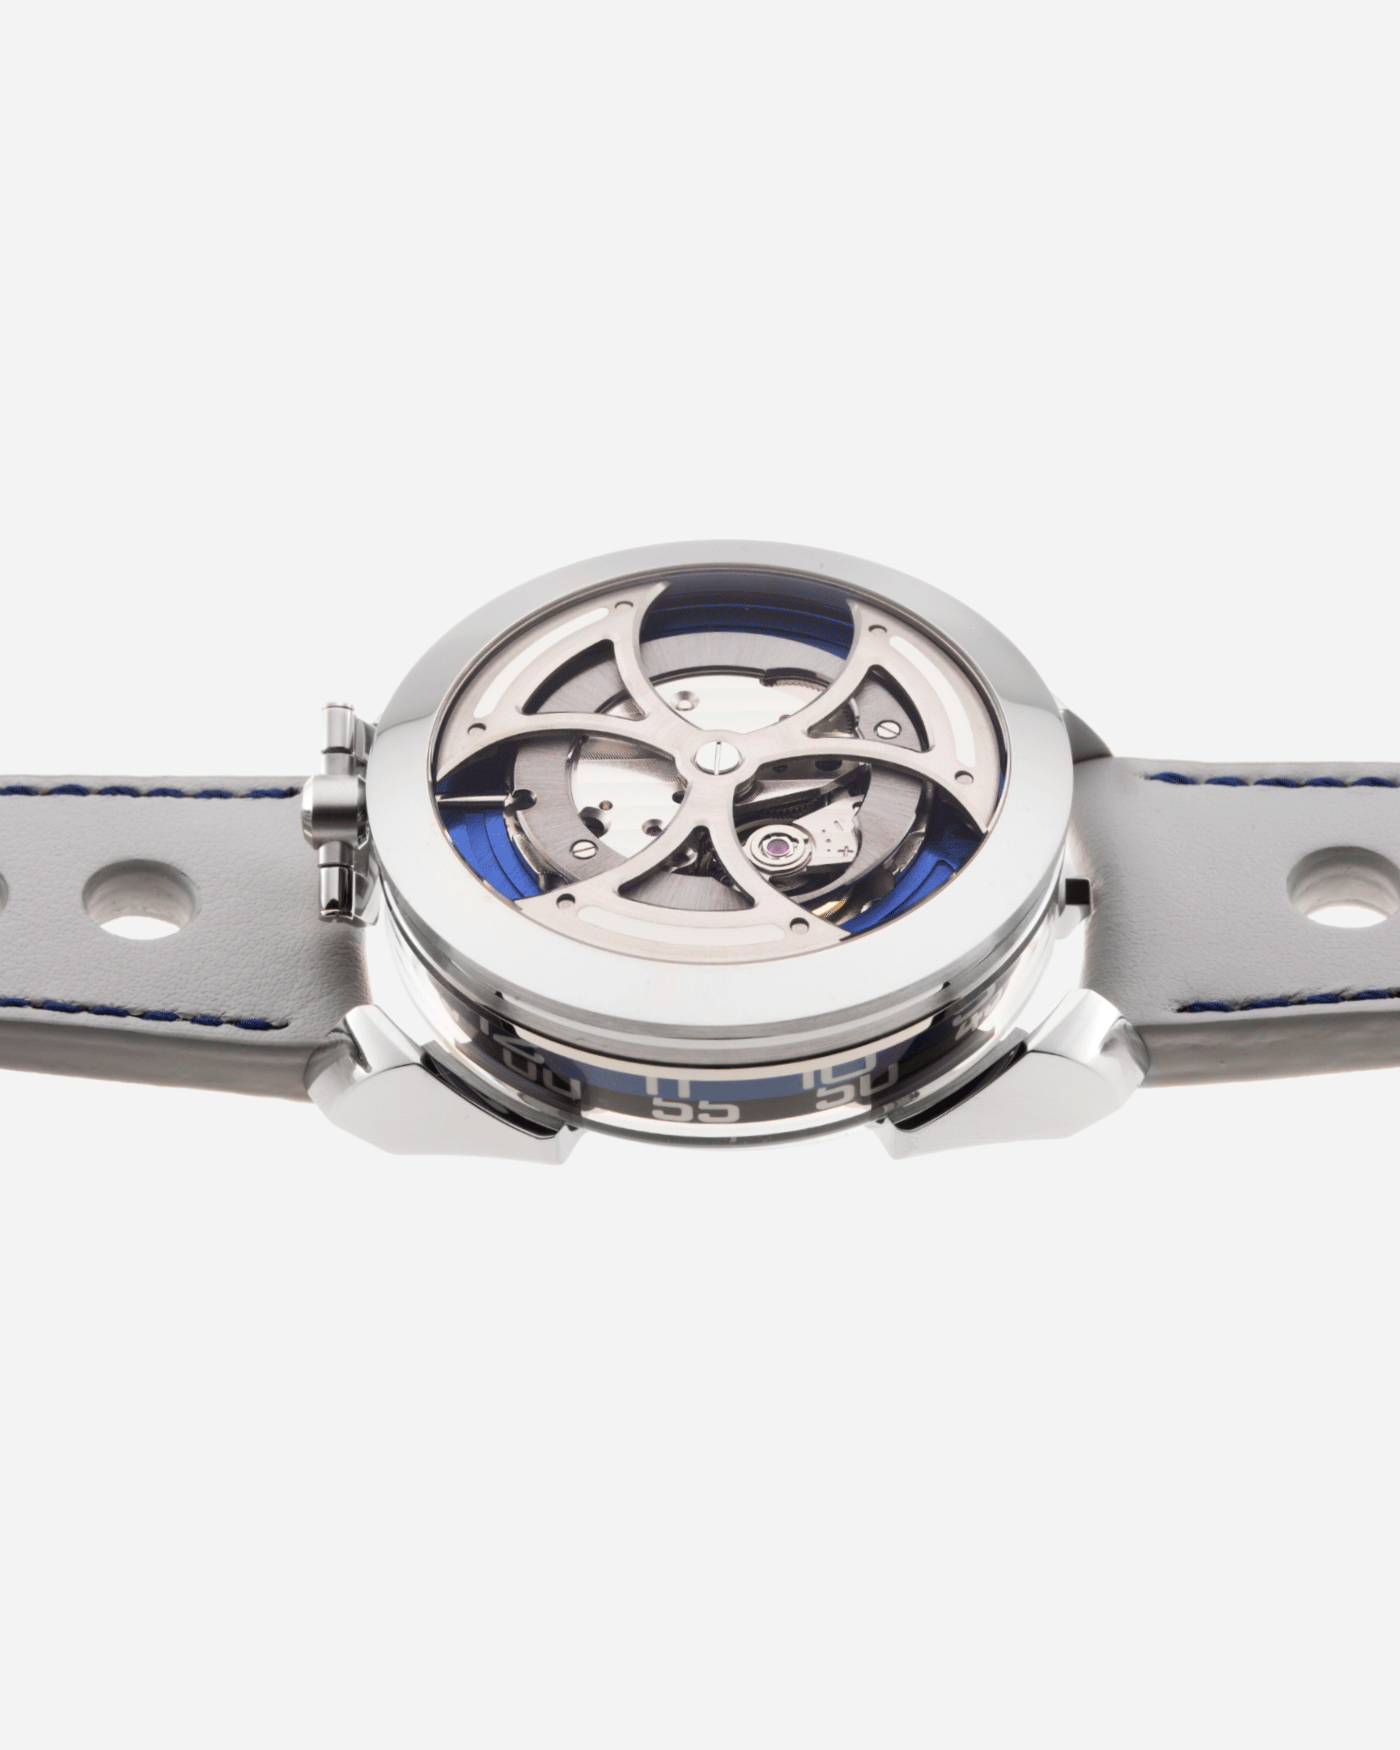 Brand: MB&F Year: 2021 Model: MAD 1 Material: Stainless Steel and Titanium Movement: Miyota Cal 821A Case Diameter: 42mm Bracelet/Strap: MB&F White Grey Leather Rally Strap and Stainless Steel Deployant 